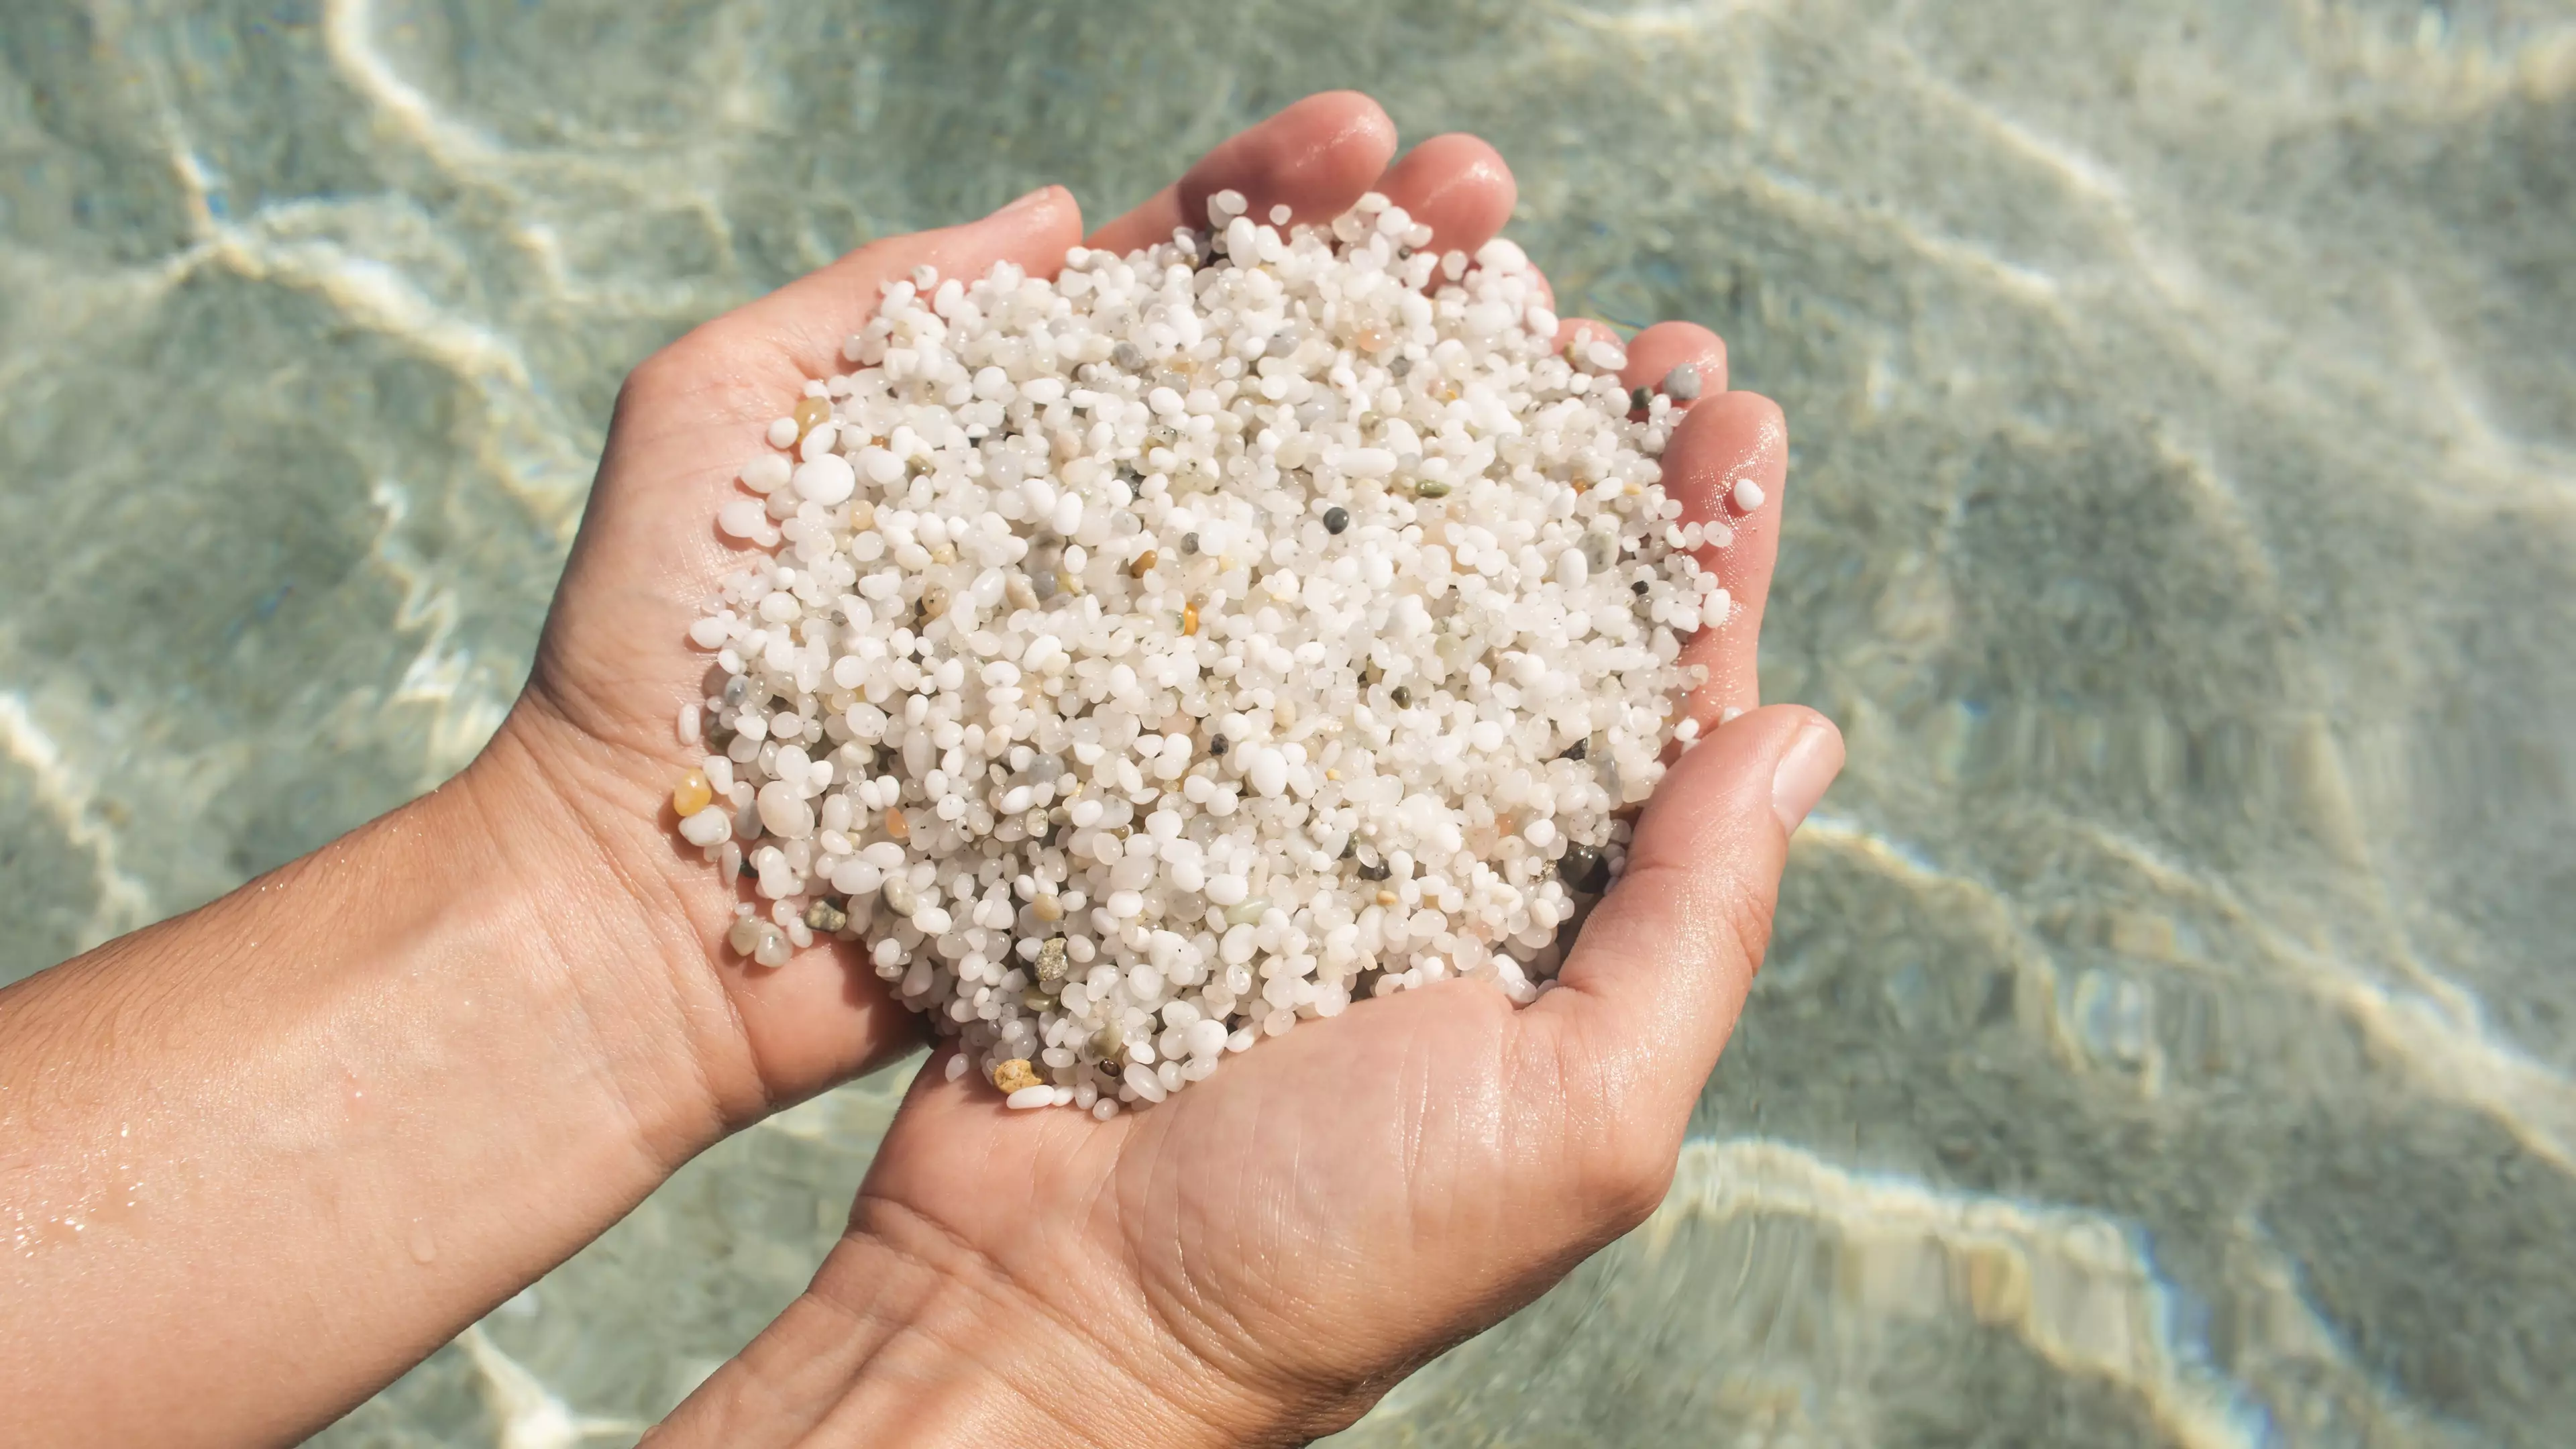 Tourist Fined £890 For Stealing Sand From Sardinian Beach